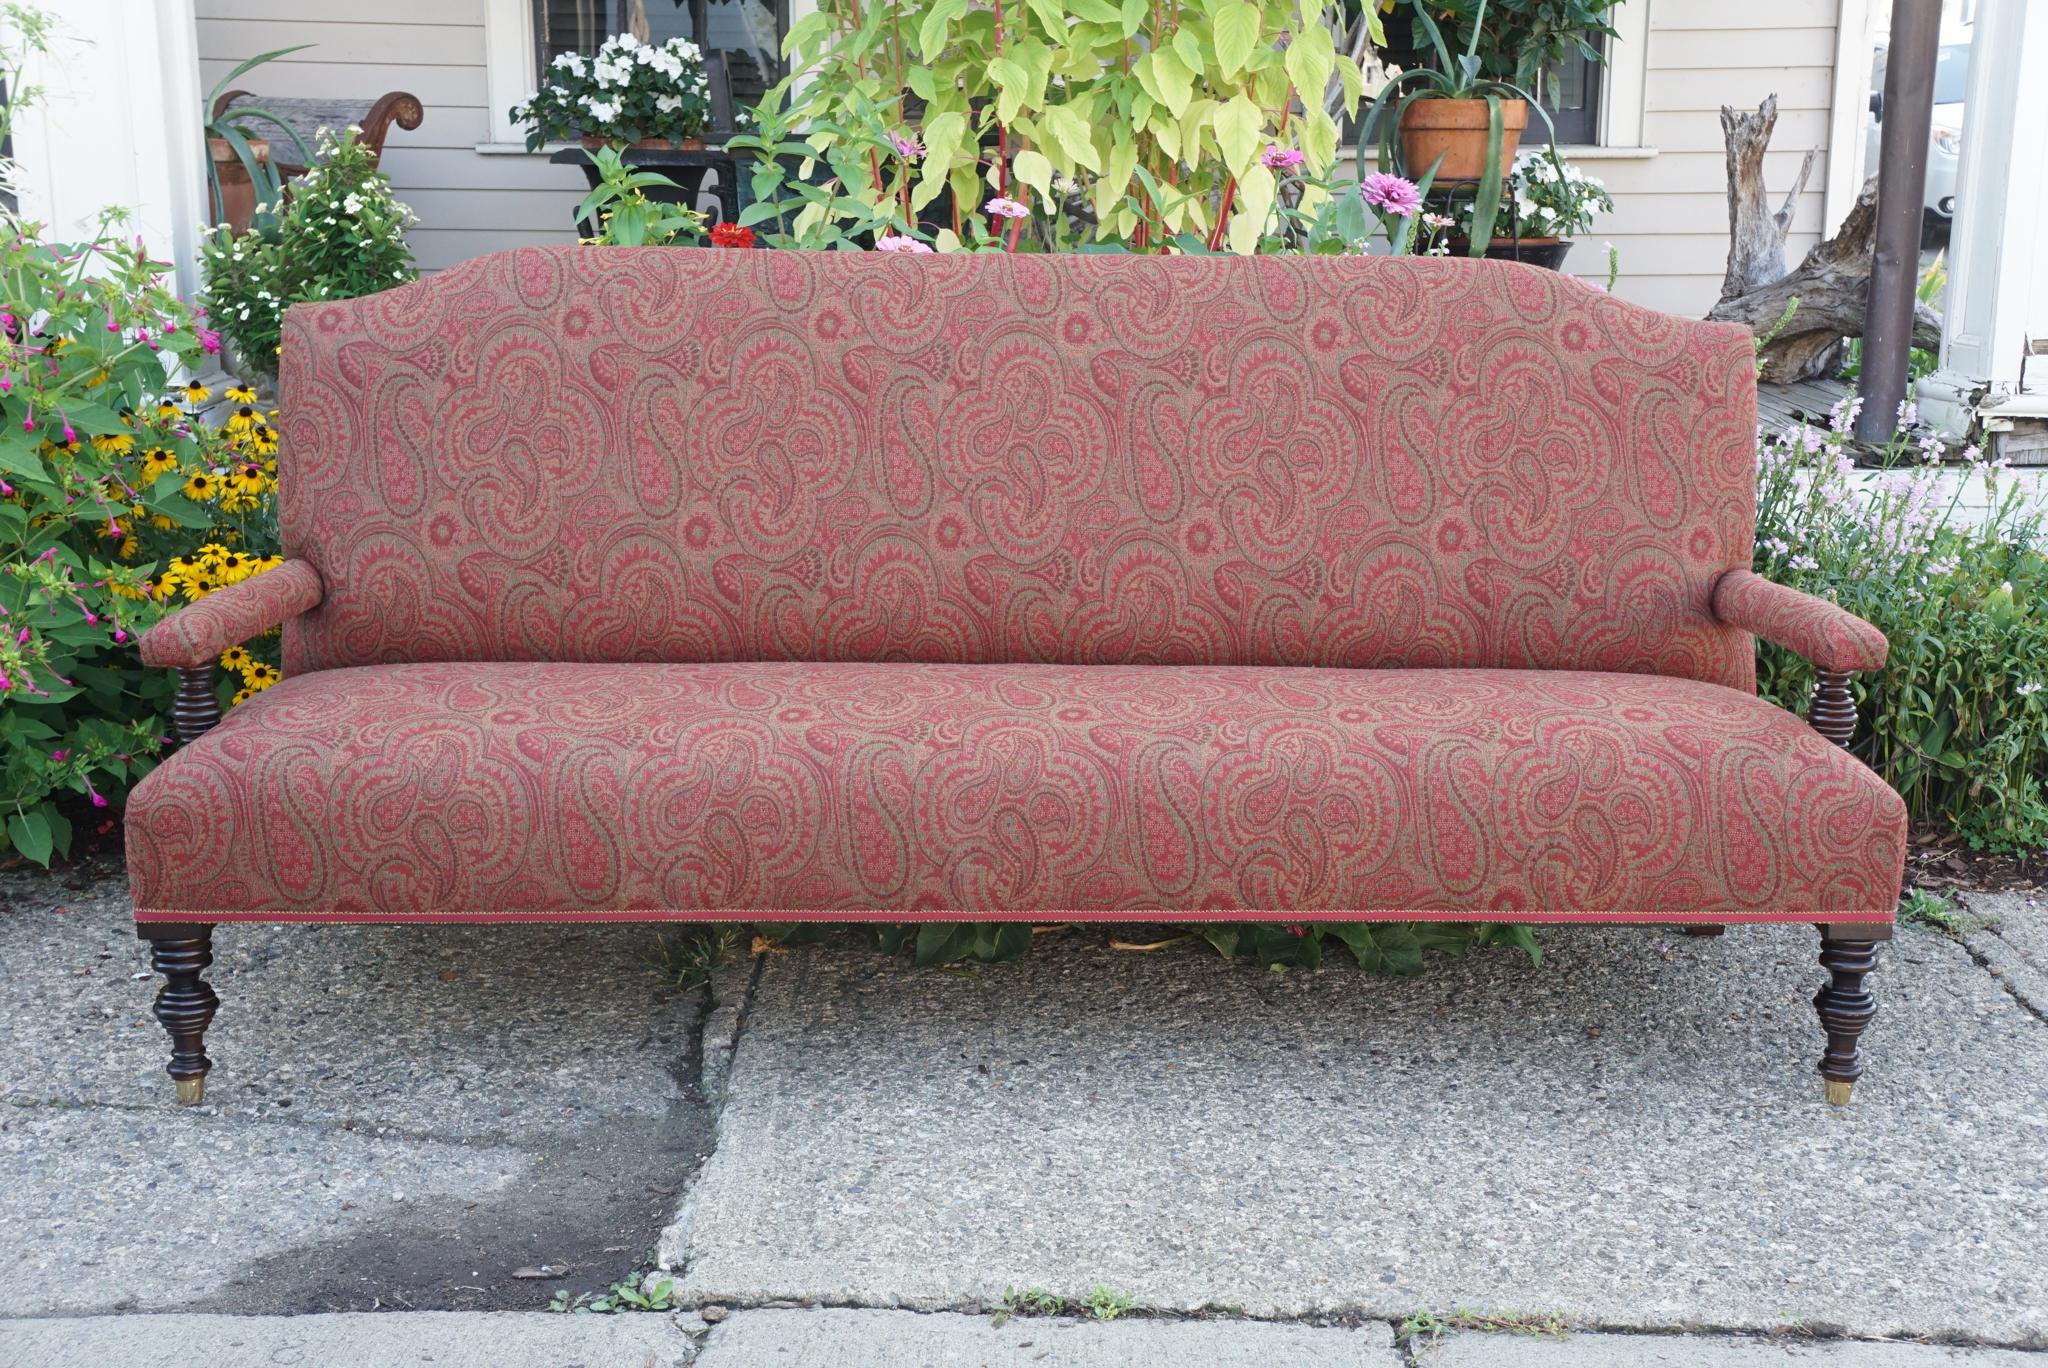 This large vintage Edwardian style sofa made in the 20th century is crafted from mahogany and features ring turned arm supports with matching front legs terminating in large brass sabots The high back and deep seat makes for easy relaxing and casual